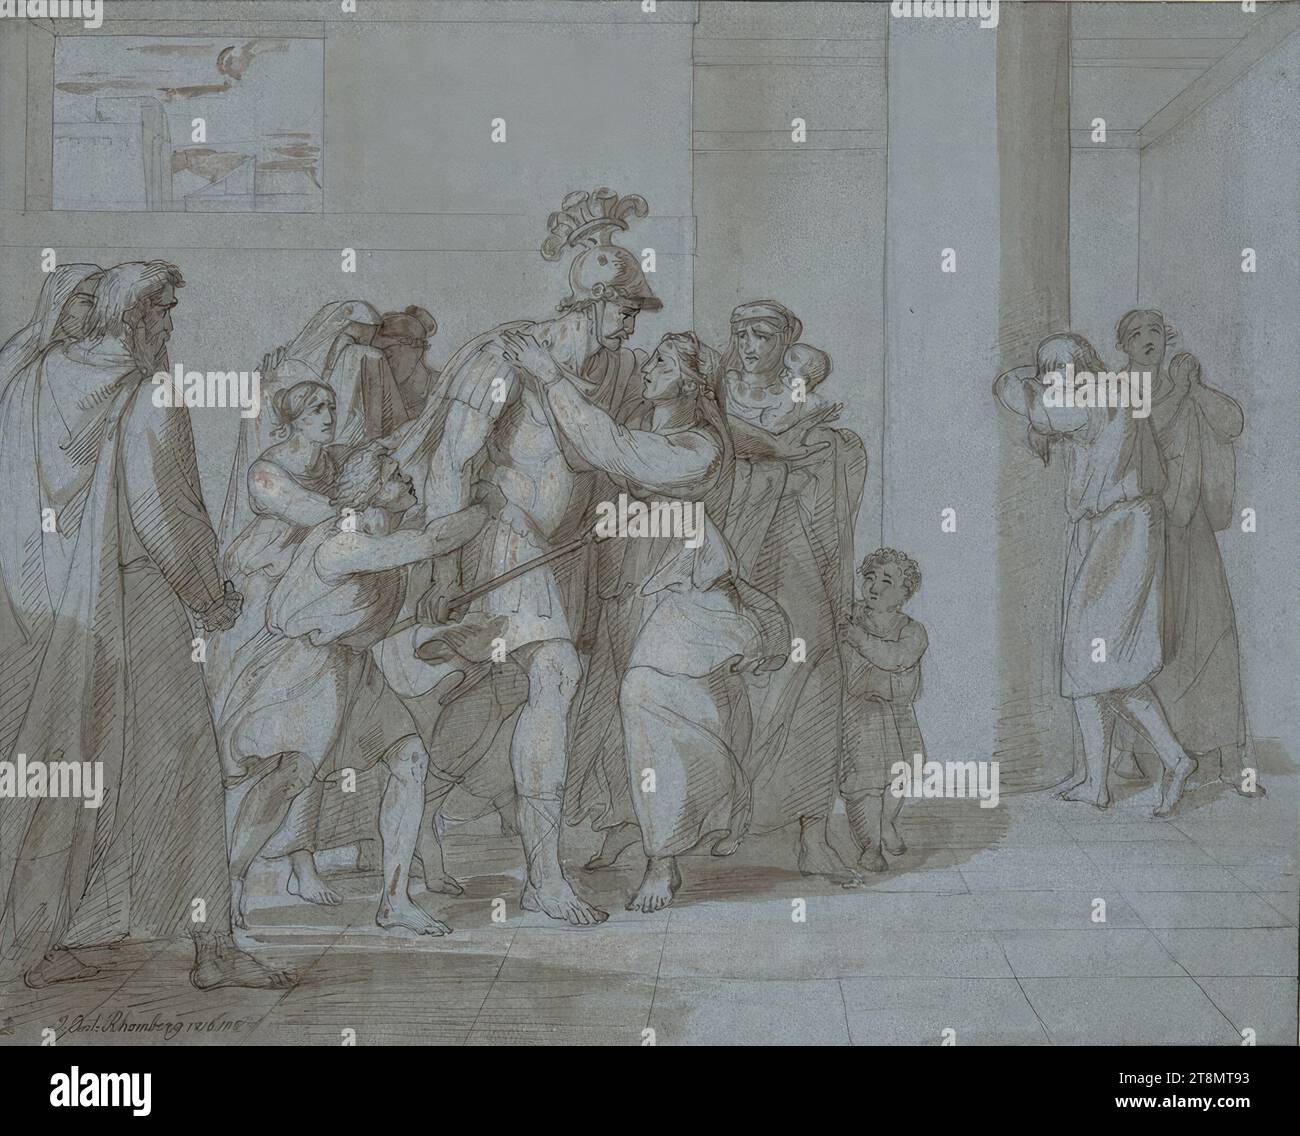 Hector's farewell to Andromache, Joseph Anton Rhomberg (Dornbirn 1786 - 1855 Munich), 1816, drawing, brown-grey pen, wash, heightened with white brush, over pencil, on blue paper; black edging, 34.1 x 42.8 cm (13 7/16 x 16 7/8 in.), l.l. Duke Albert of Saxe-Teschen, l.u. 'J:Ant:Rhomberg 1816 inv' (pen in brown-grey over earlier lettering in pencil: illegible with numbers '18') Passepartout: on Albert mount 'Jean Antoine Rhomberg', 'Hector entouré de ses Parens en pleur prenant Conge d'Andromaque au Mom Stock Photo